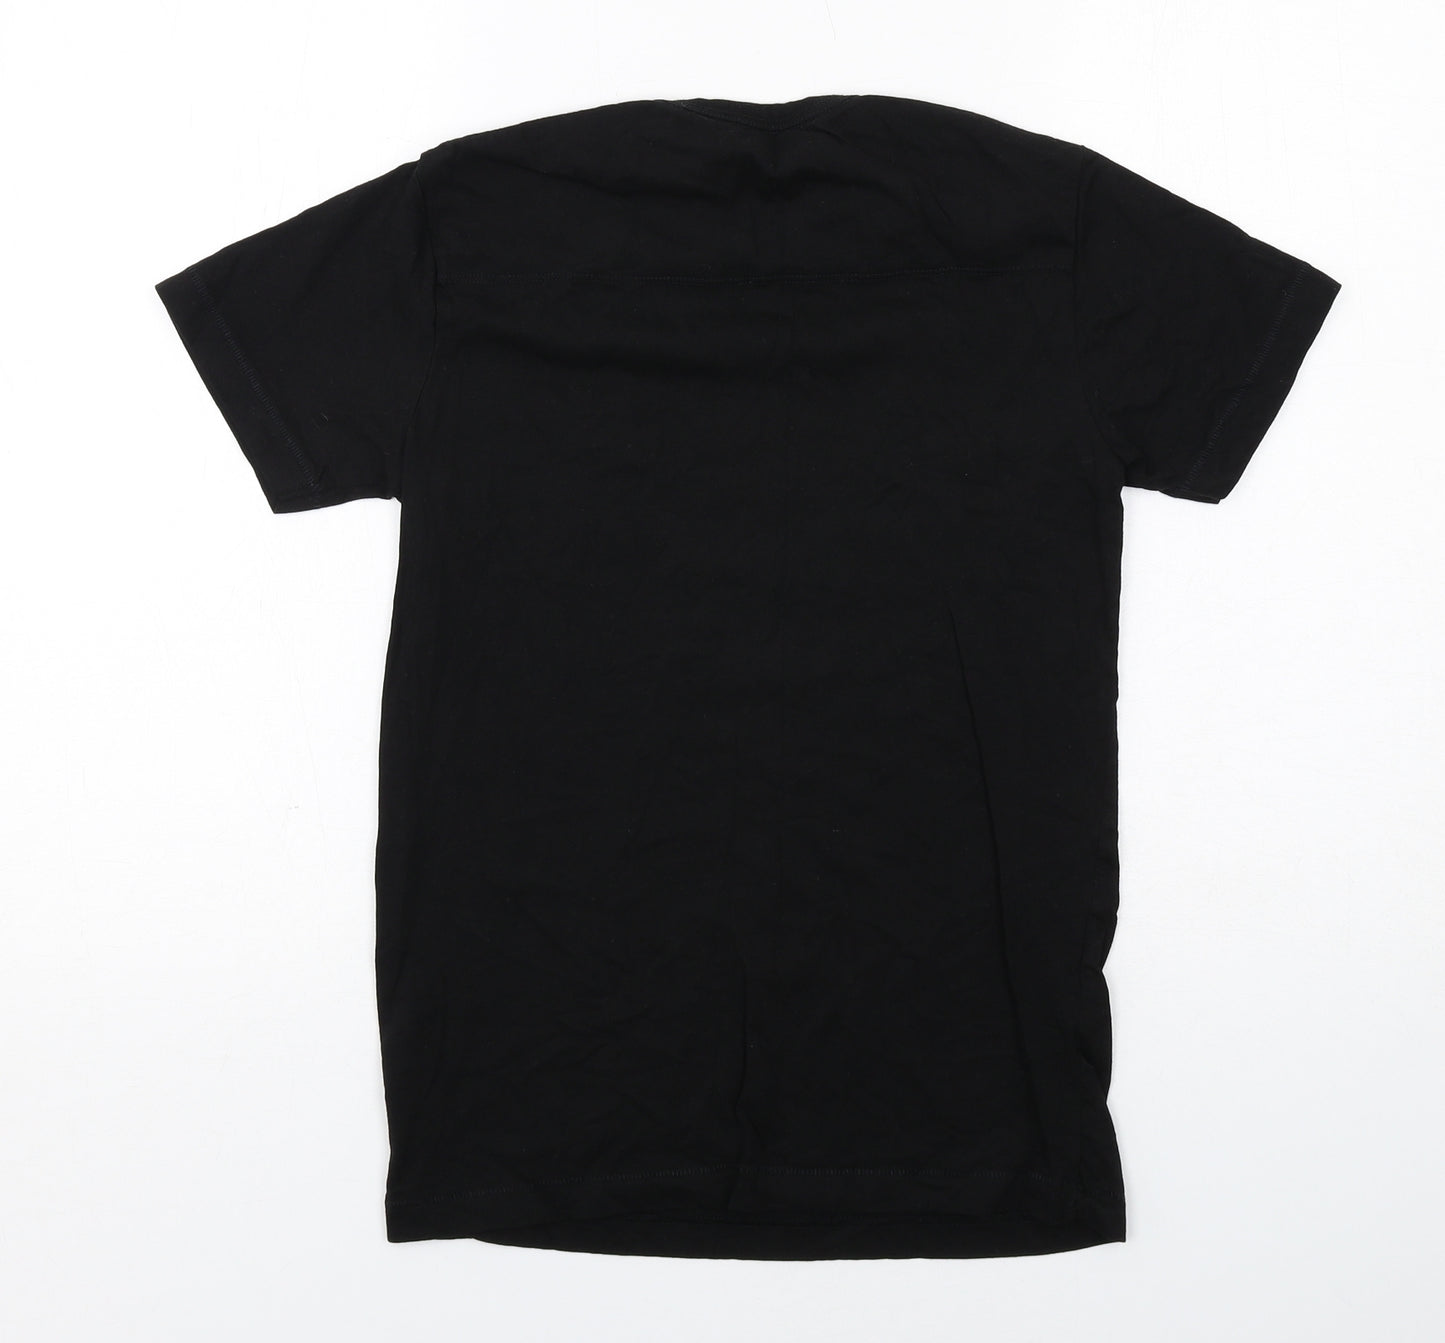 French Connection Boys Black Cotton Basic T-Shirt Size 11-12 Years Crew Neck Pullover